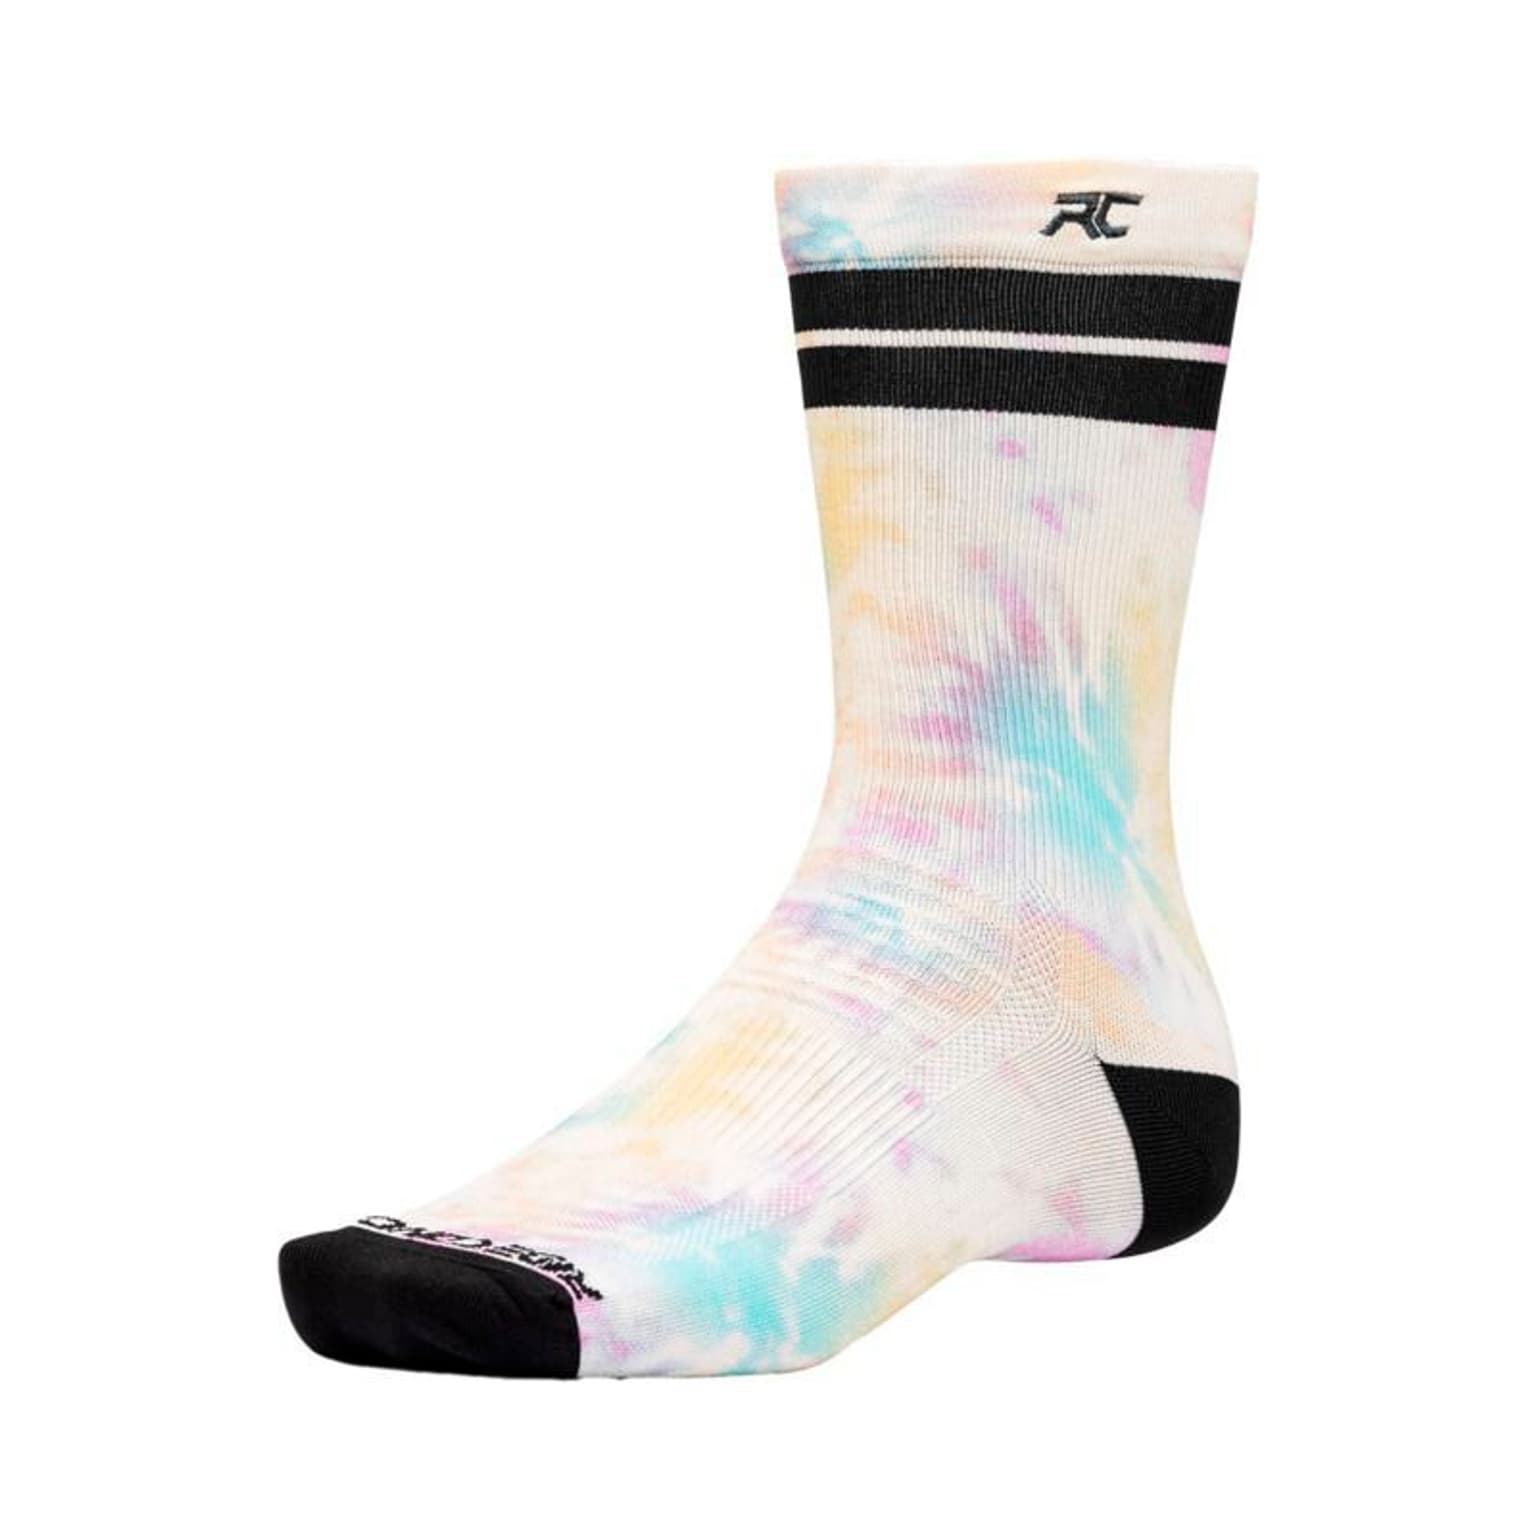 Ride Concepts Ride Concepts Alibi Synthetic Velosocken rohweiss 1